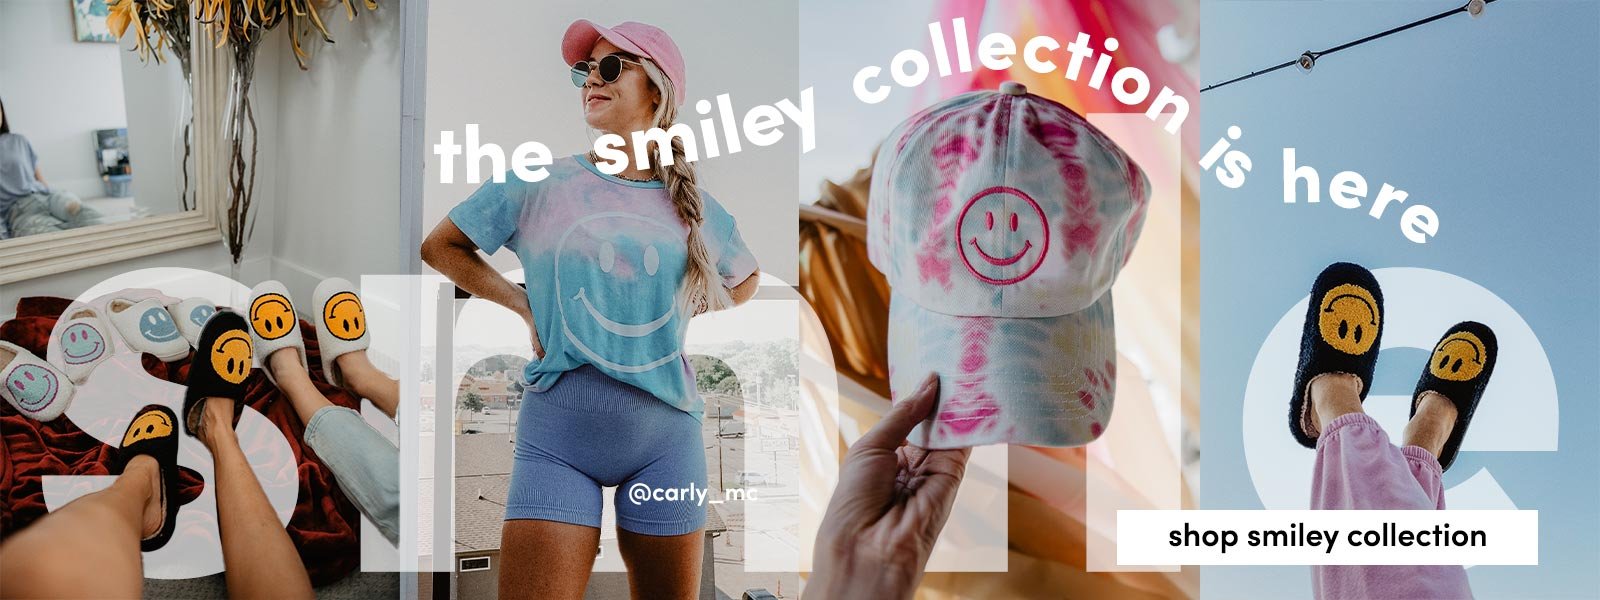 the smiley collection is here